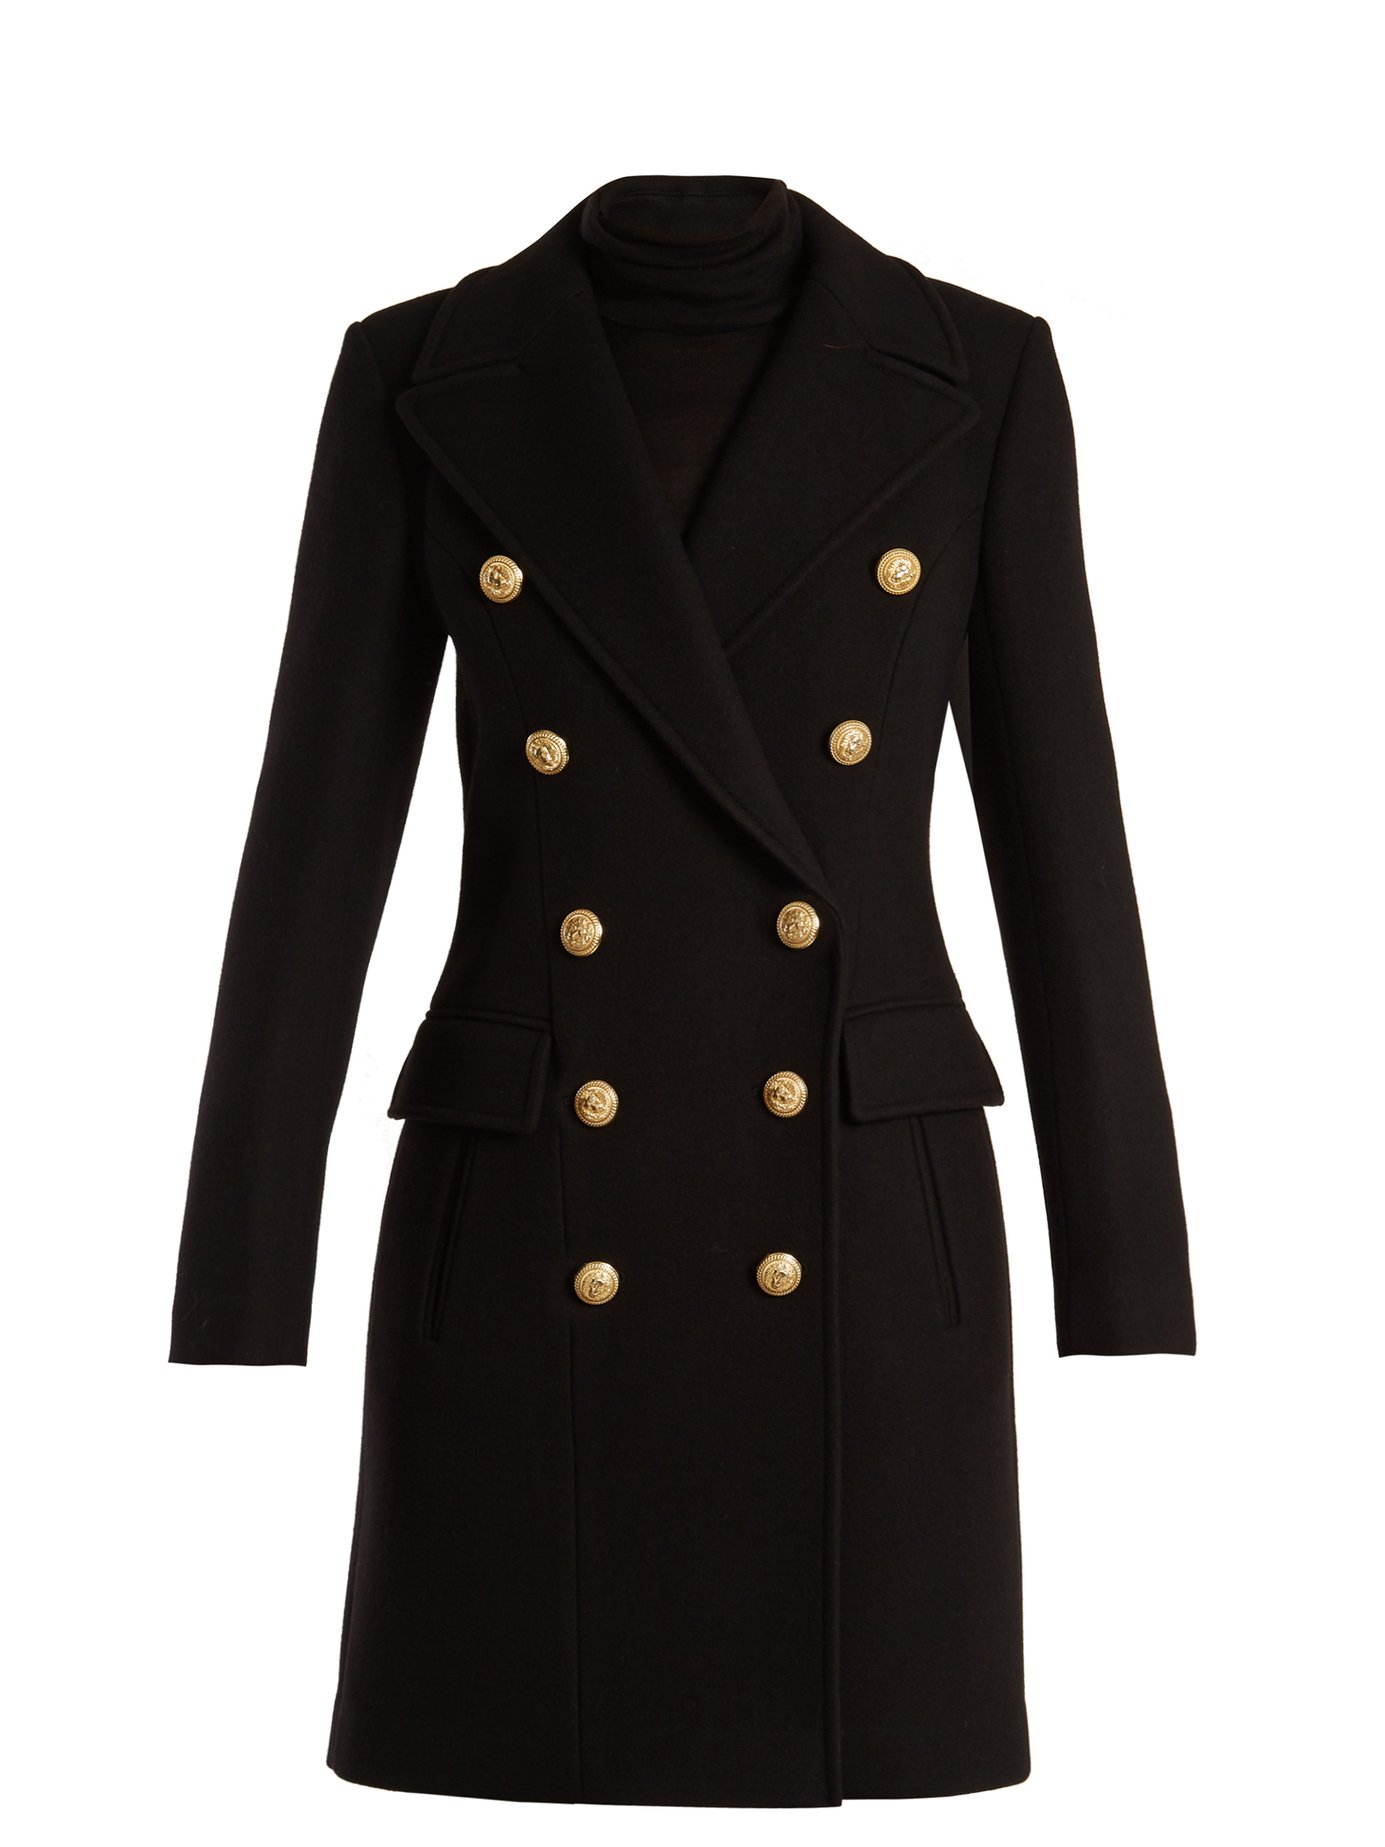 BALMAIN DOUBLE-BREASTED WOOL AND CASHMERE-BLEND COAT, BLACK | ModeSens